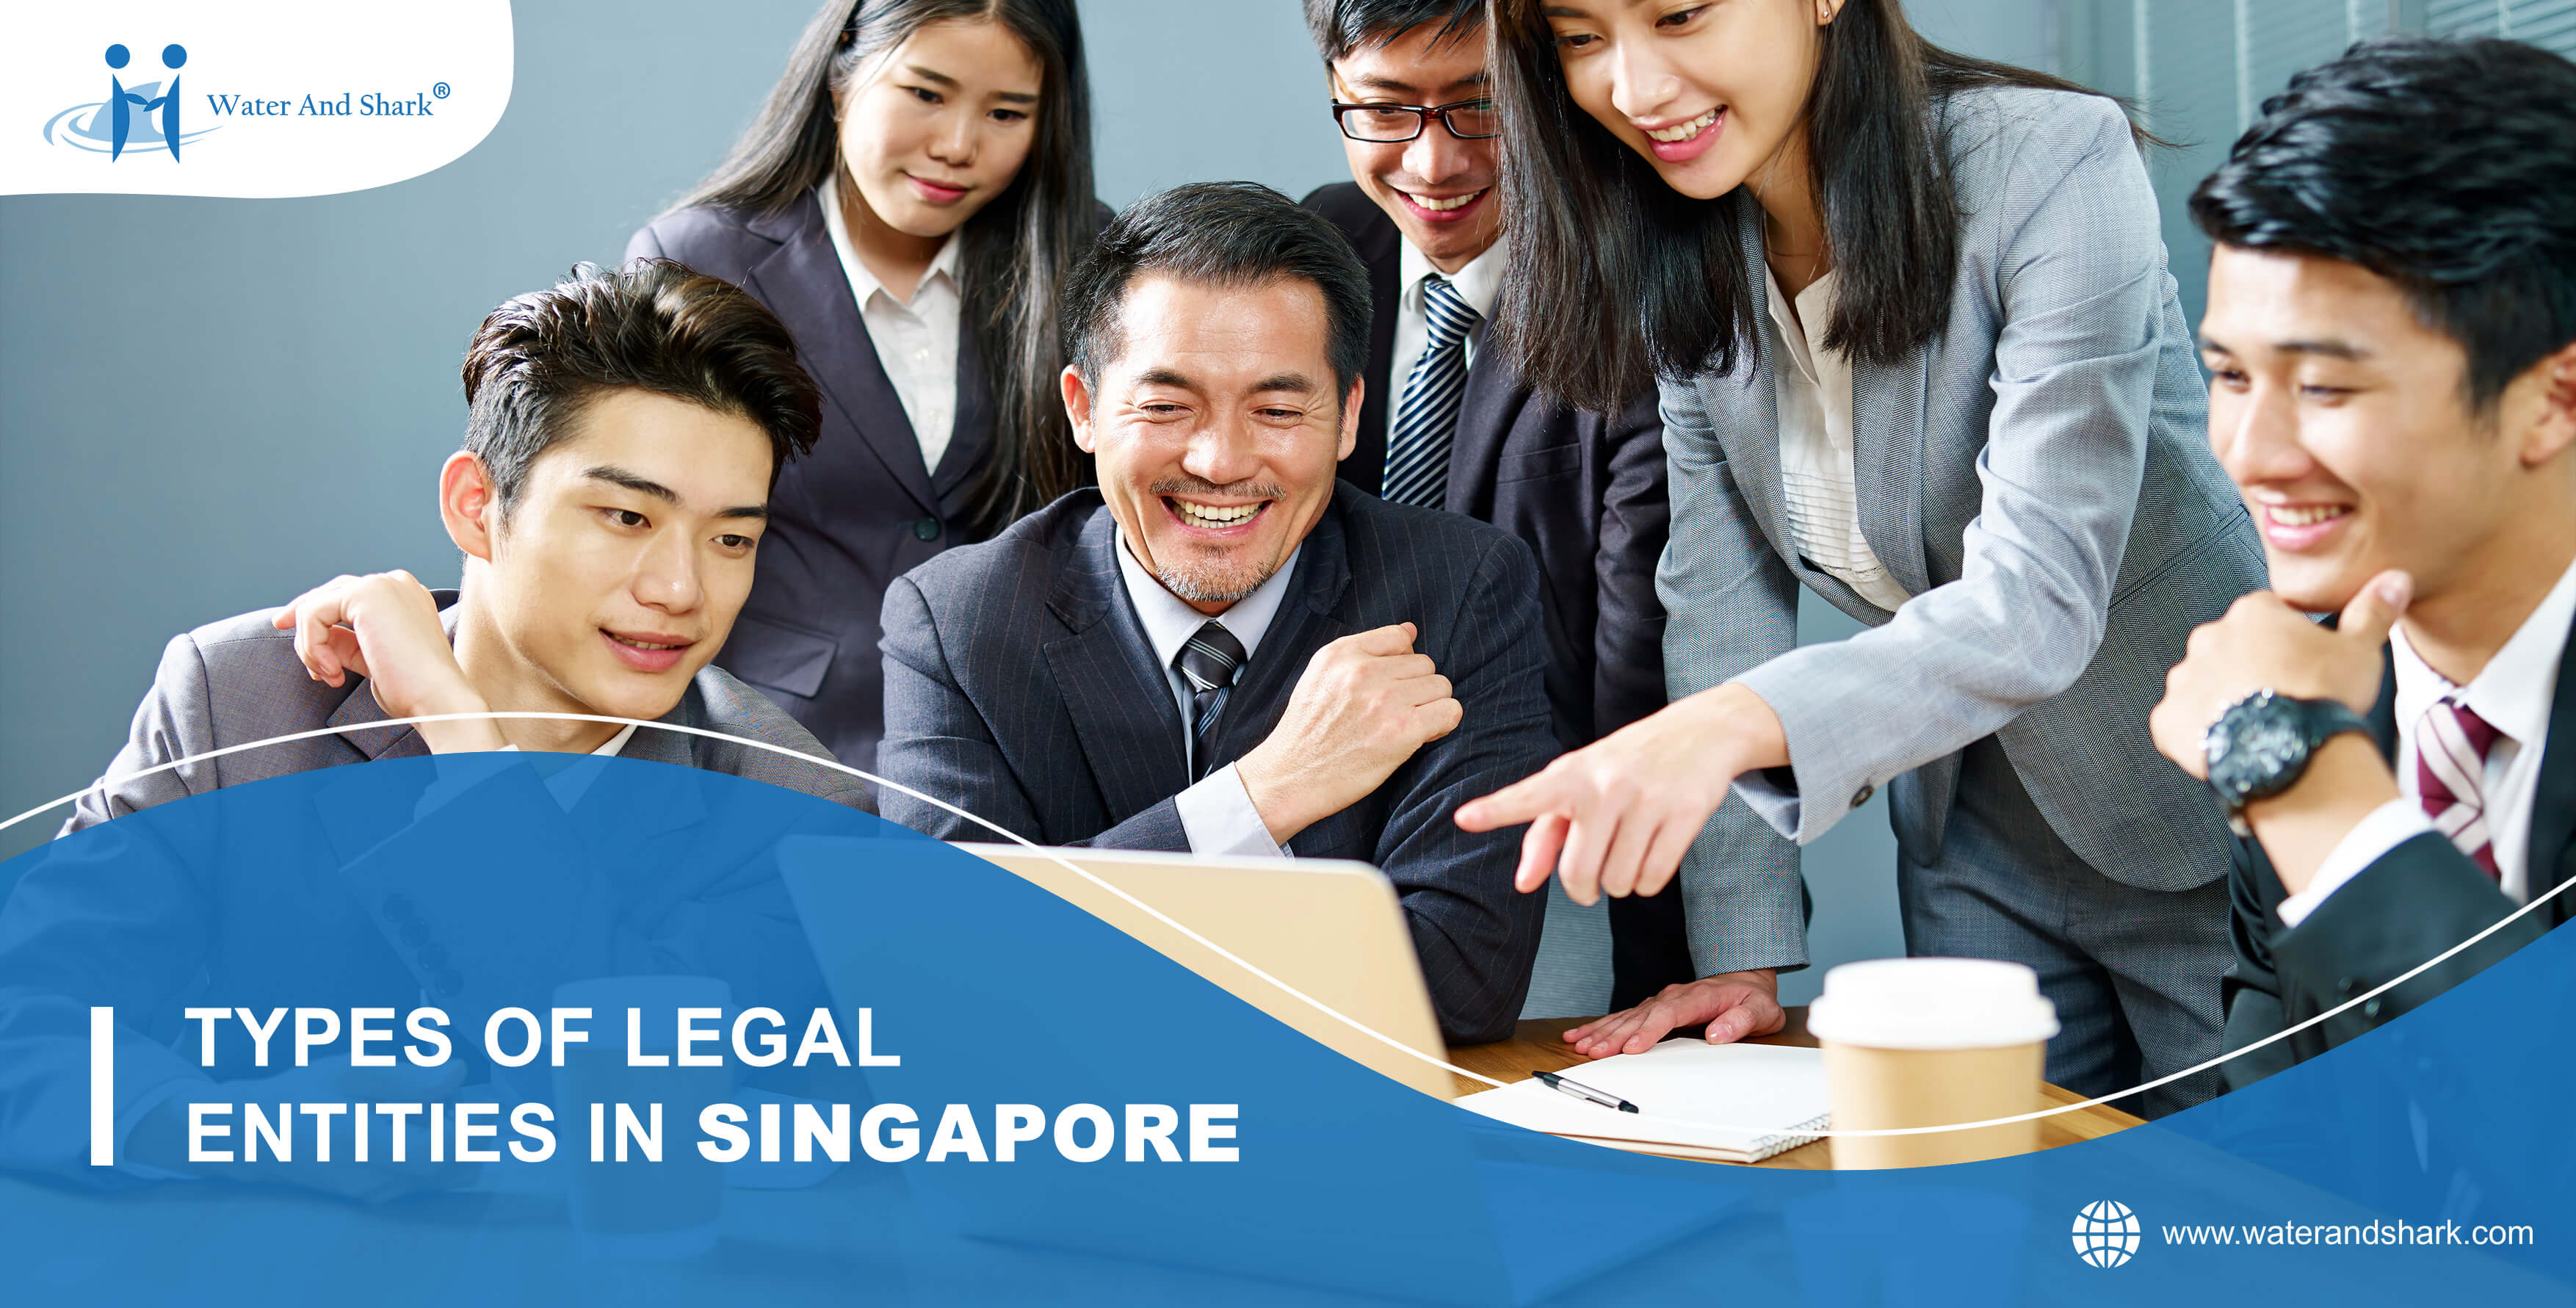 TYPES_OF_LEGAL_ENTITIES_IN_SINGAPORE_650x1280.jpg